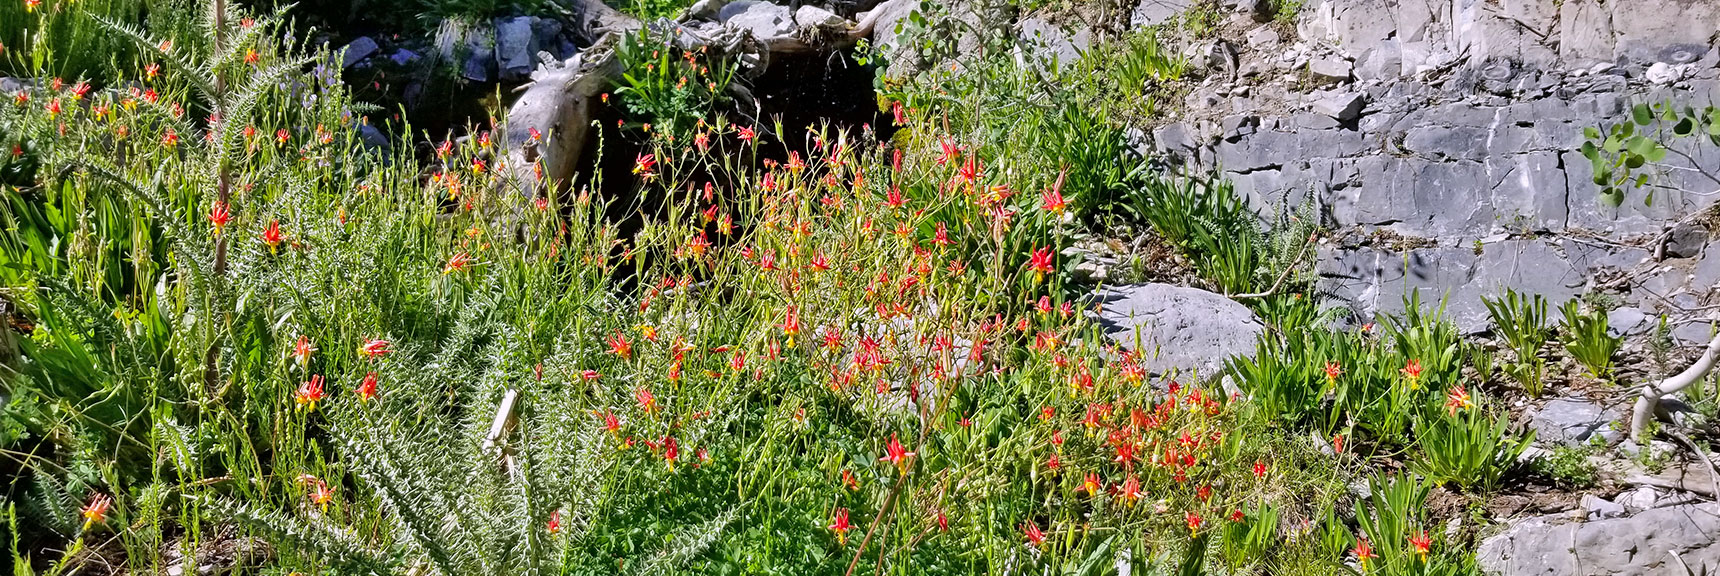 Field of Columbine Wildflowers in Canyon Wash | Cathedral Rock to South Ridge Kyle Canyon Summit, Nevada